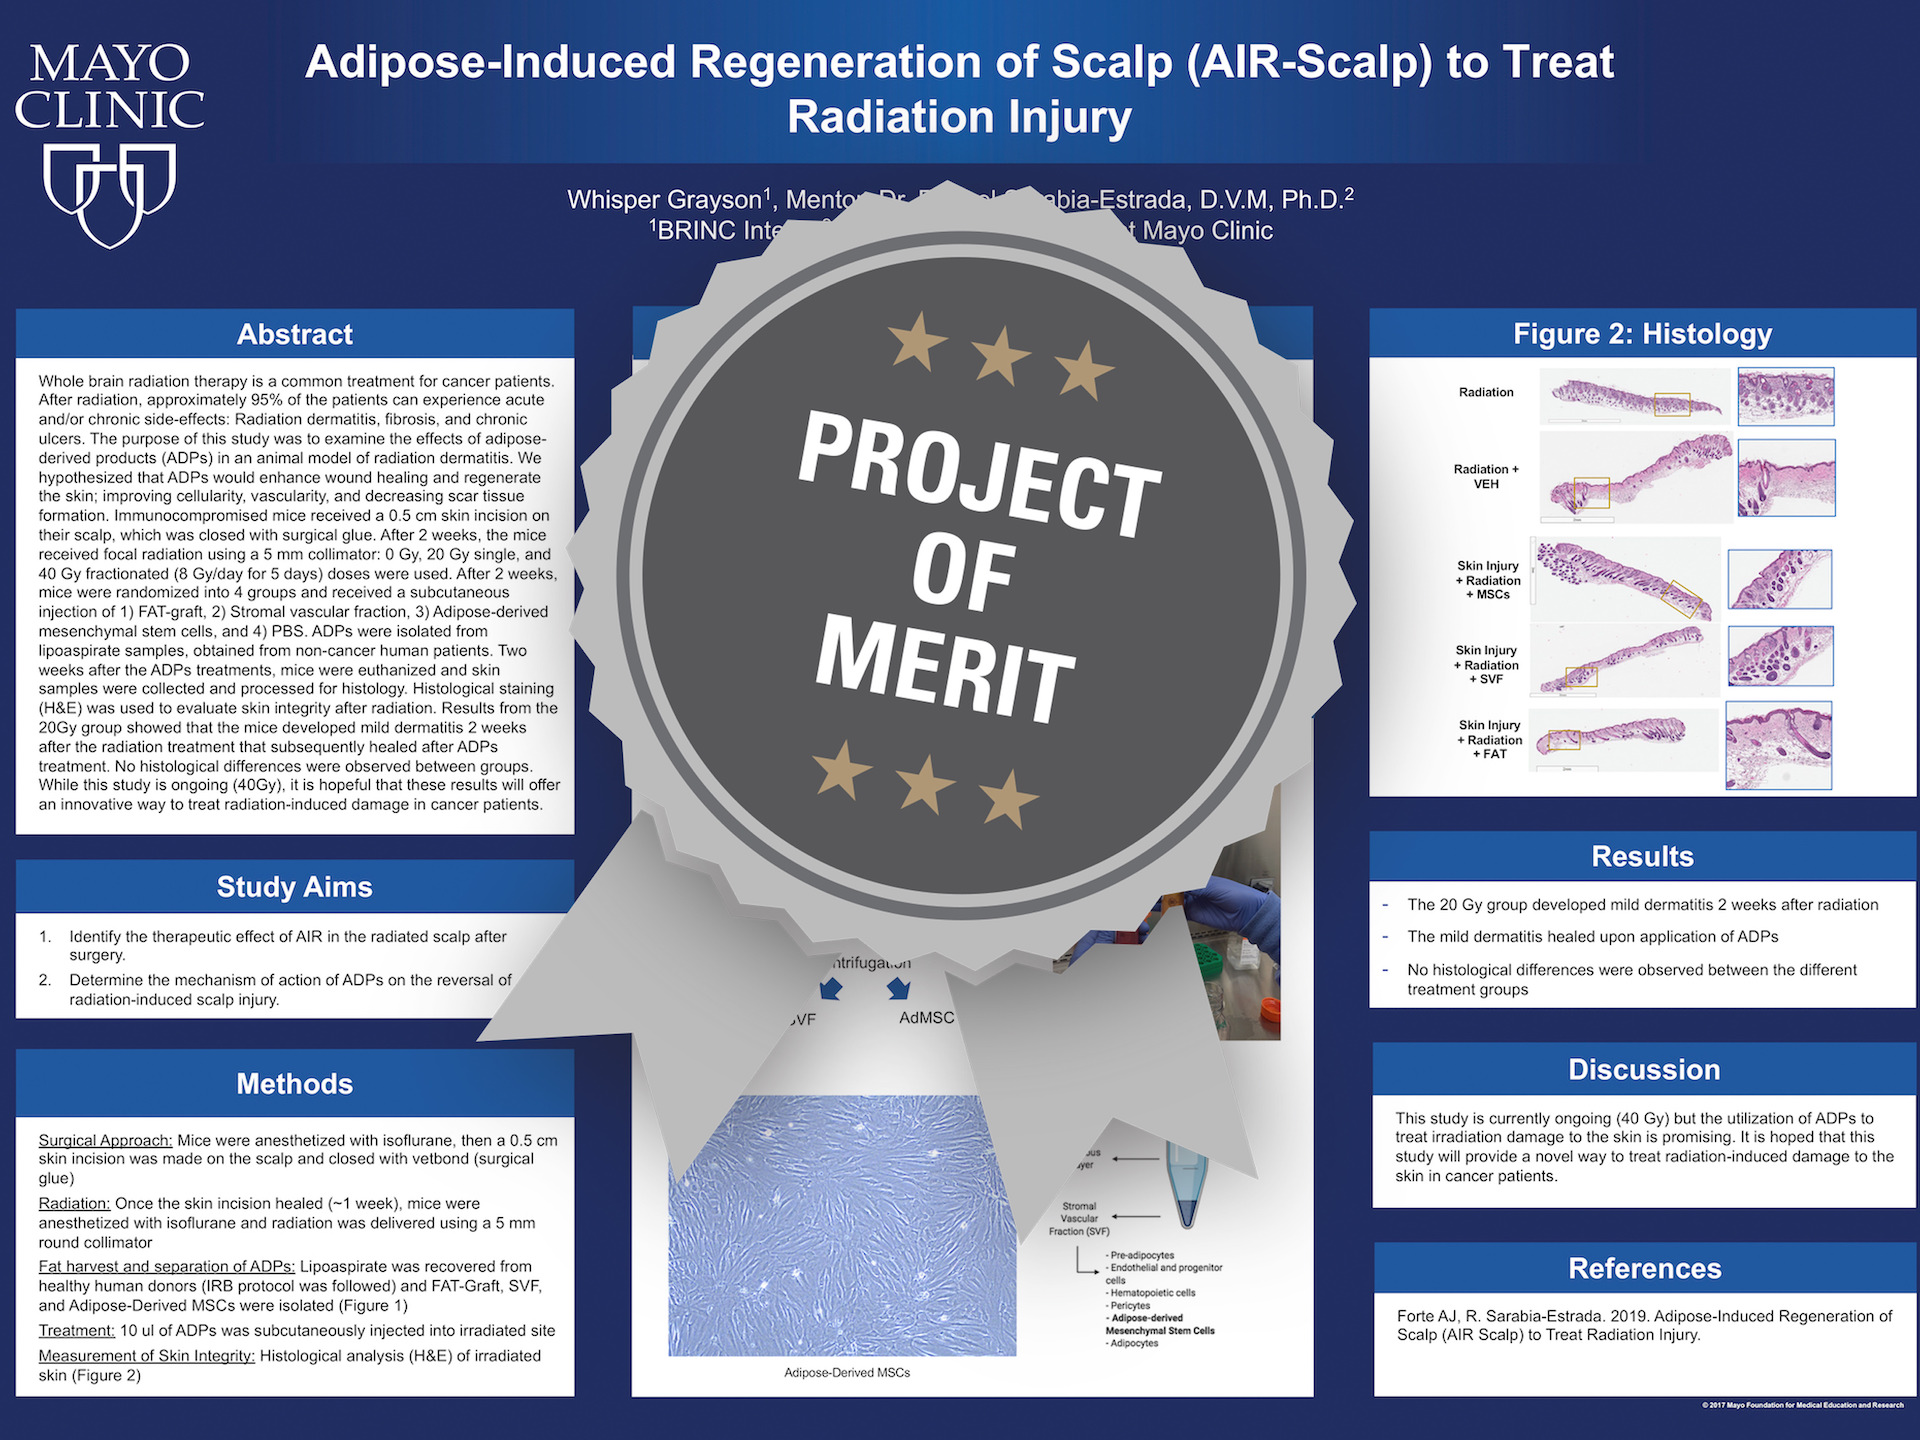 Adipose-Induced Regeneration of Scalp (AIR-Scalp) to Treat Radiation Injury Project of Merit poster